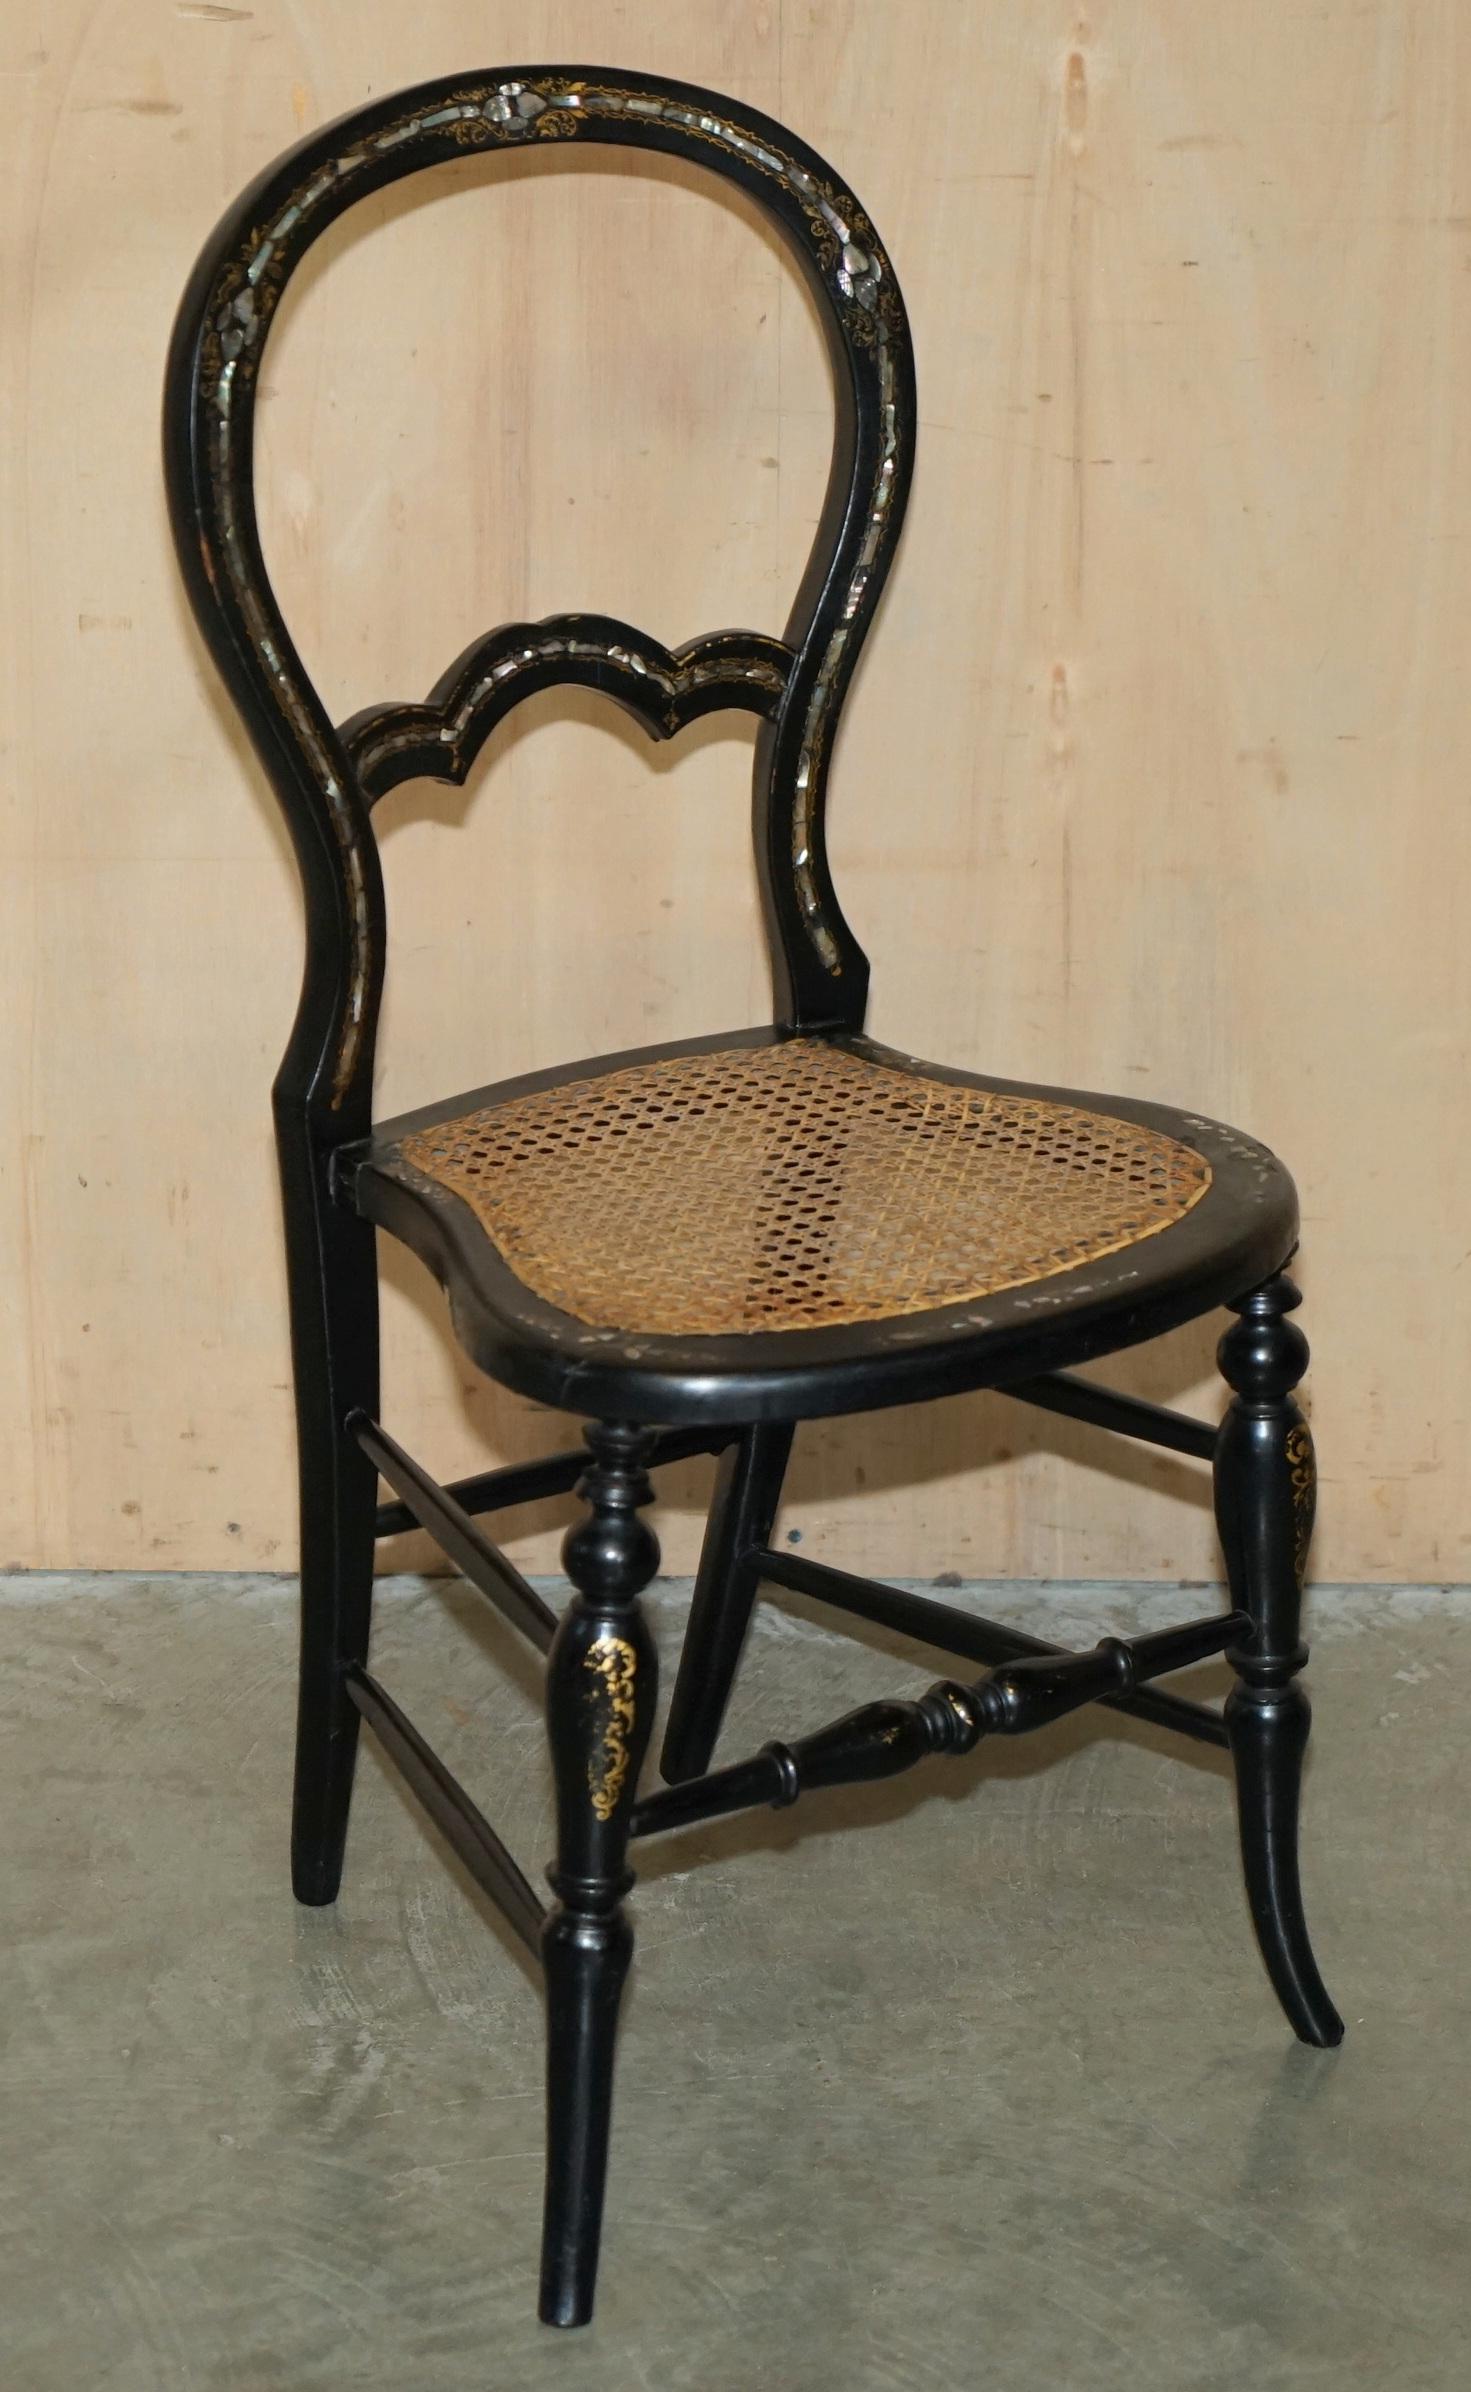 FOUR FINE AND ANTIQUE REGENCY BERGERE MOTHER OF PEARL EBONISED SIDE CHAIRs For Sale 9